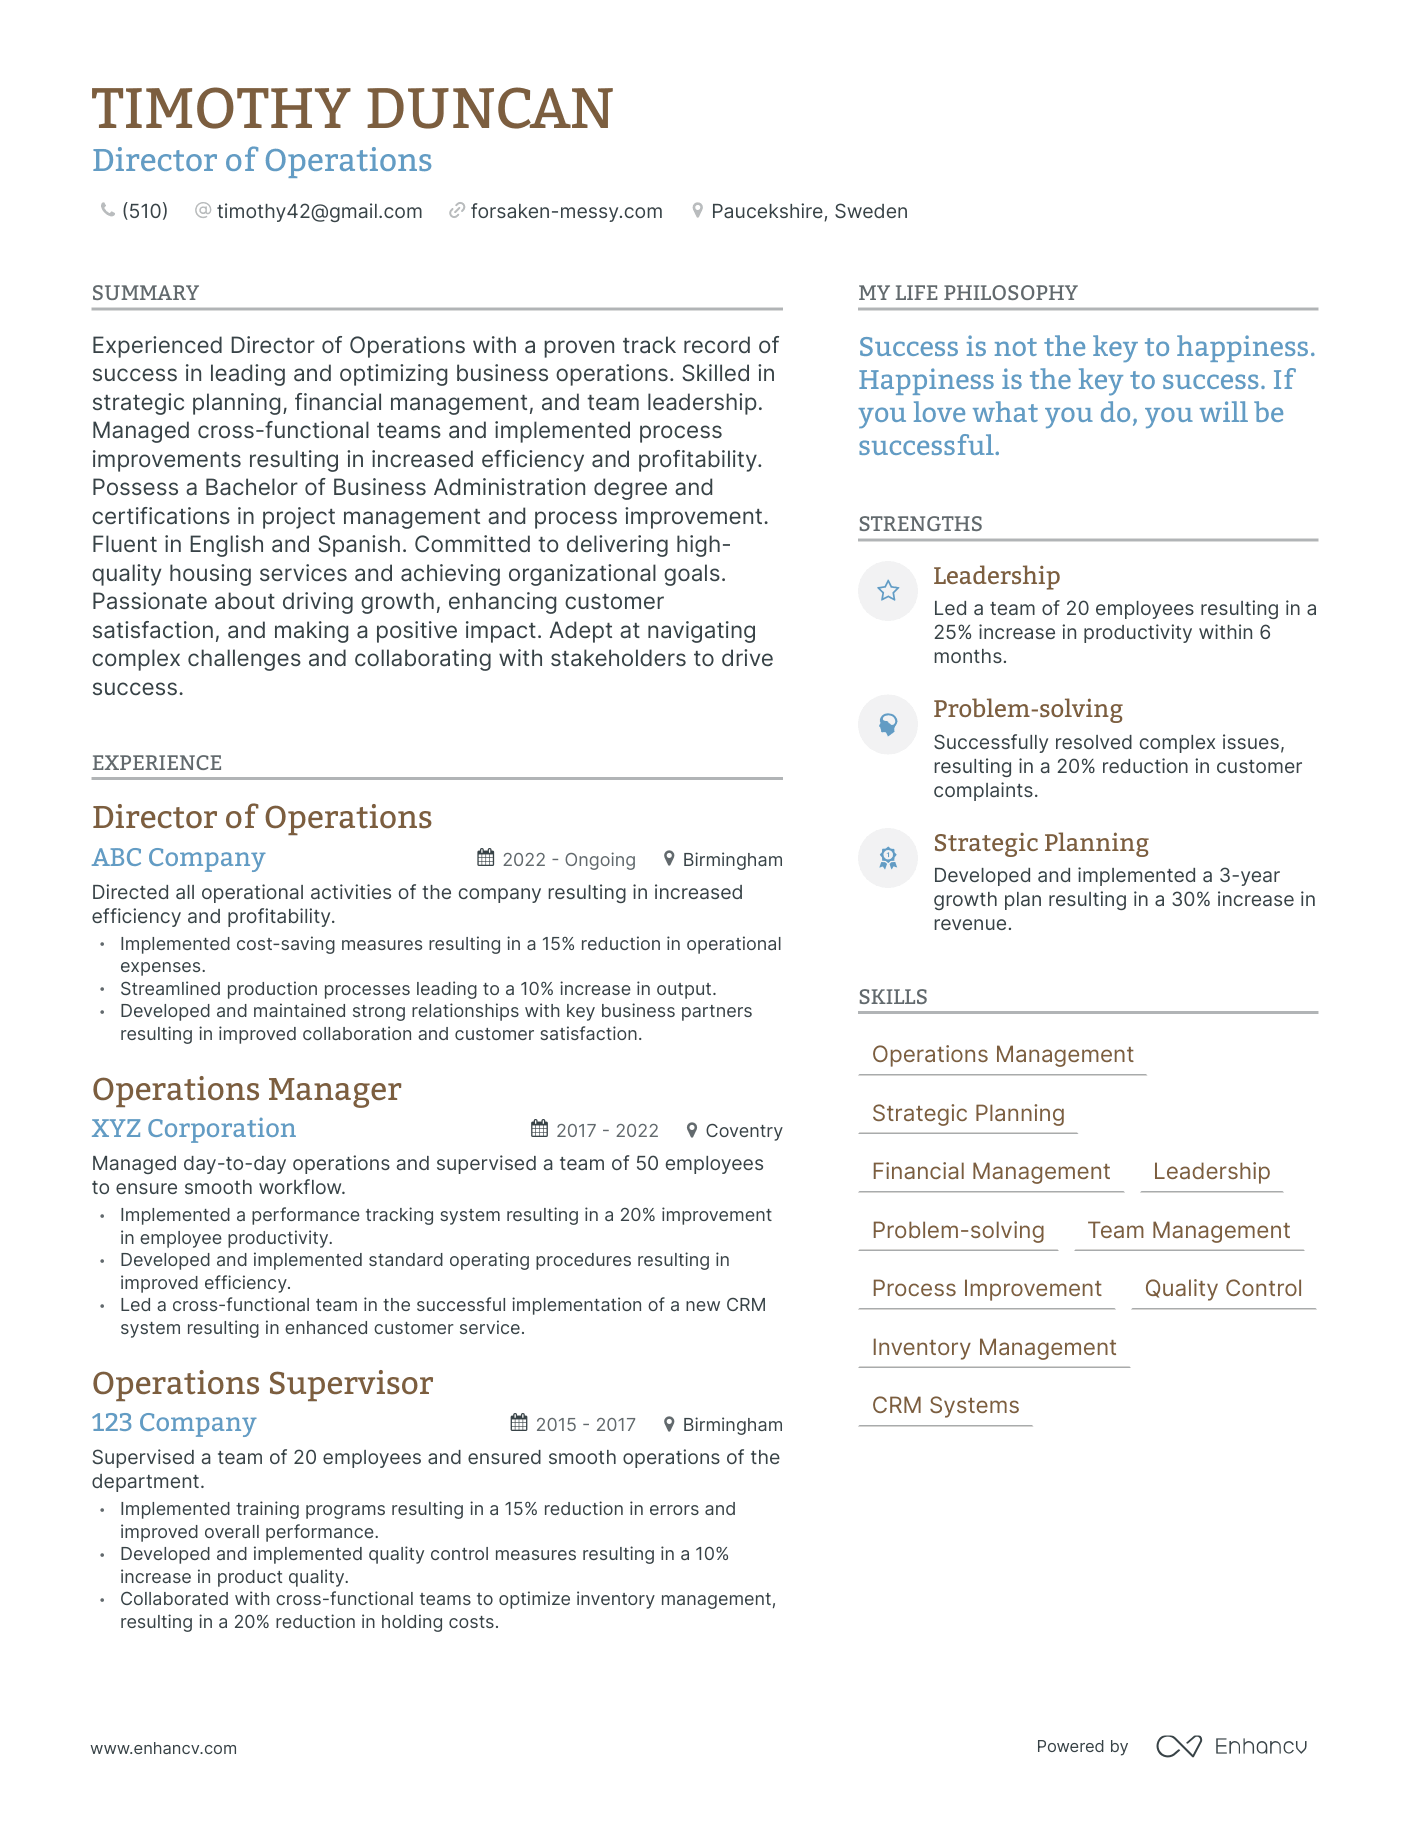 Director of Operations resume example